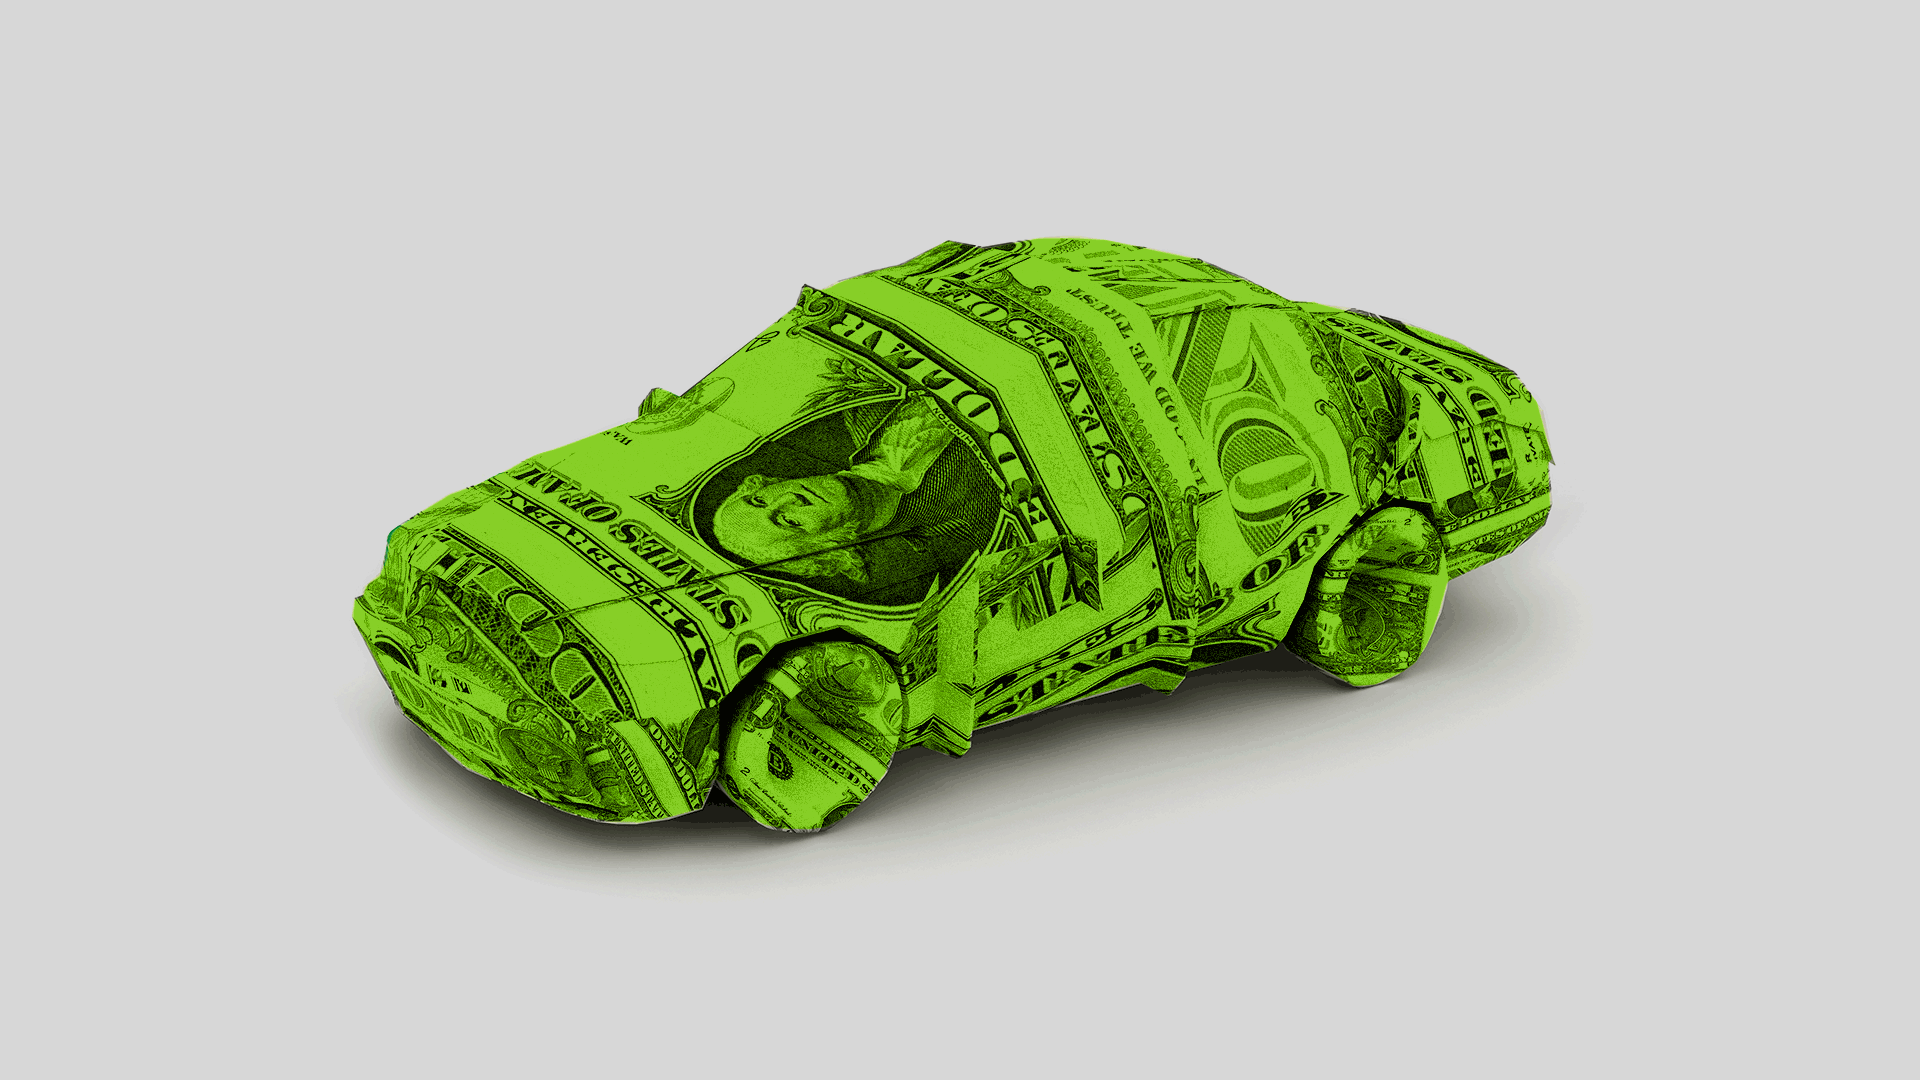 An illustration of a car wrapped in money.